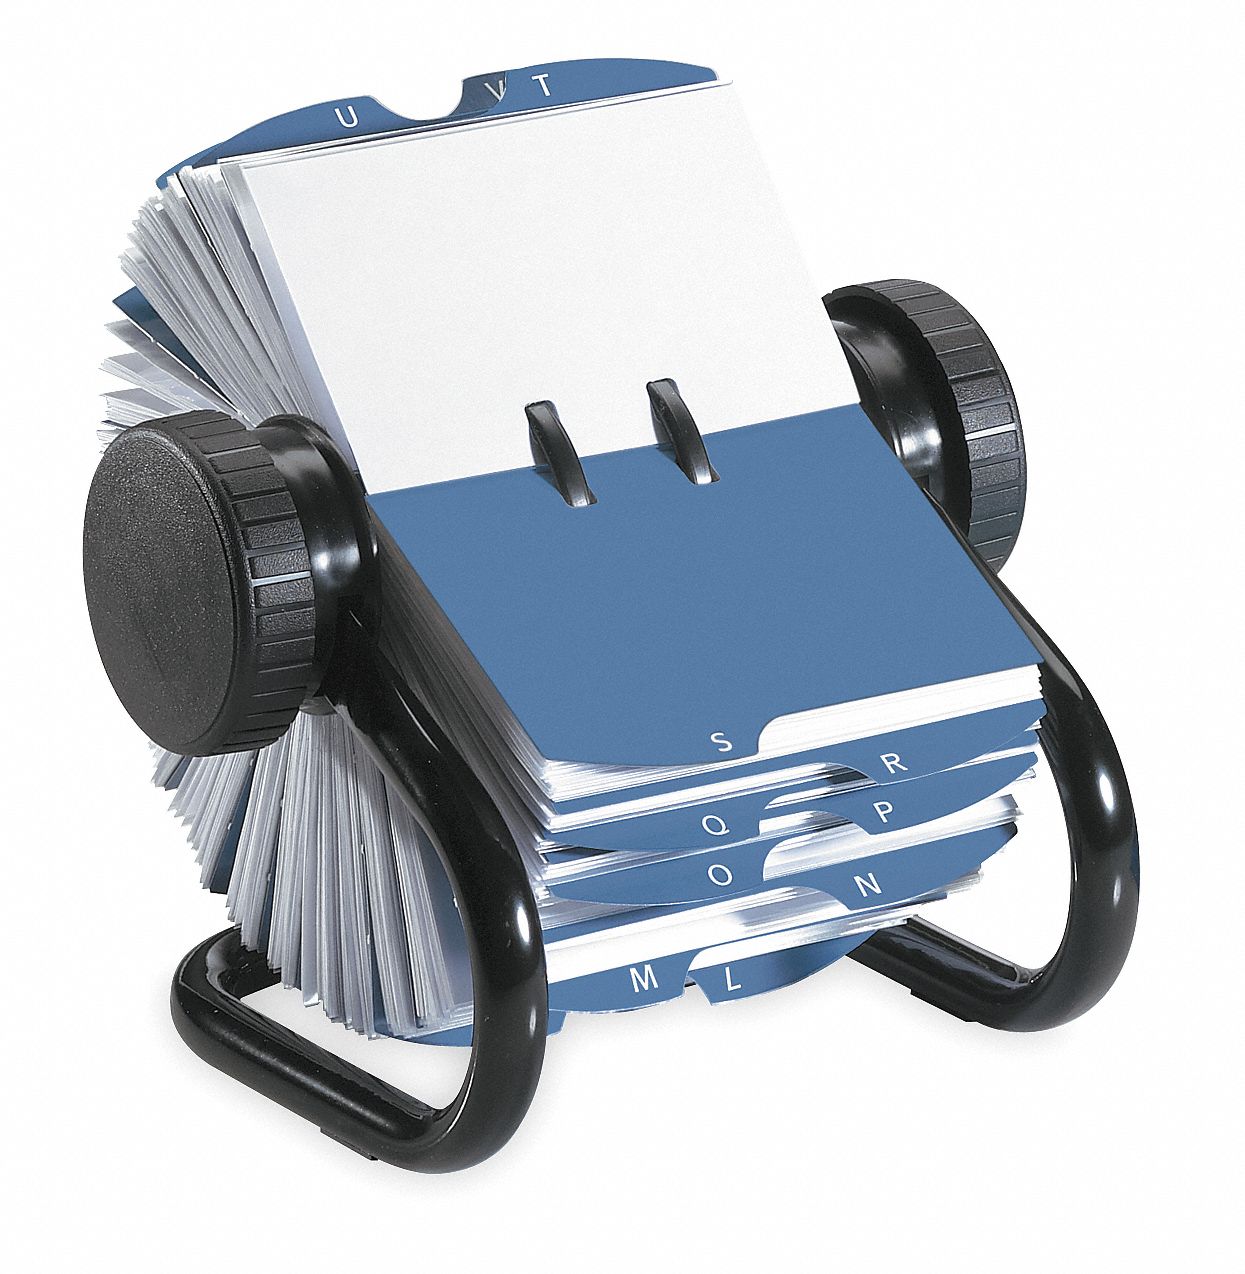 4.4 x 8.2 cm Rolodex 1753M2 Tan Rotary Card File with 2000 Cards 1 3/4 x 3 1/4 with Lock and Key 